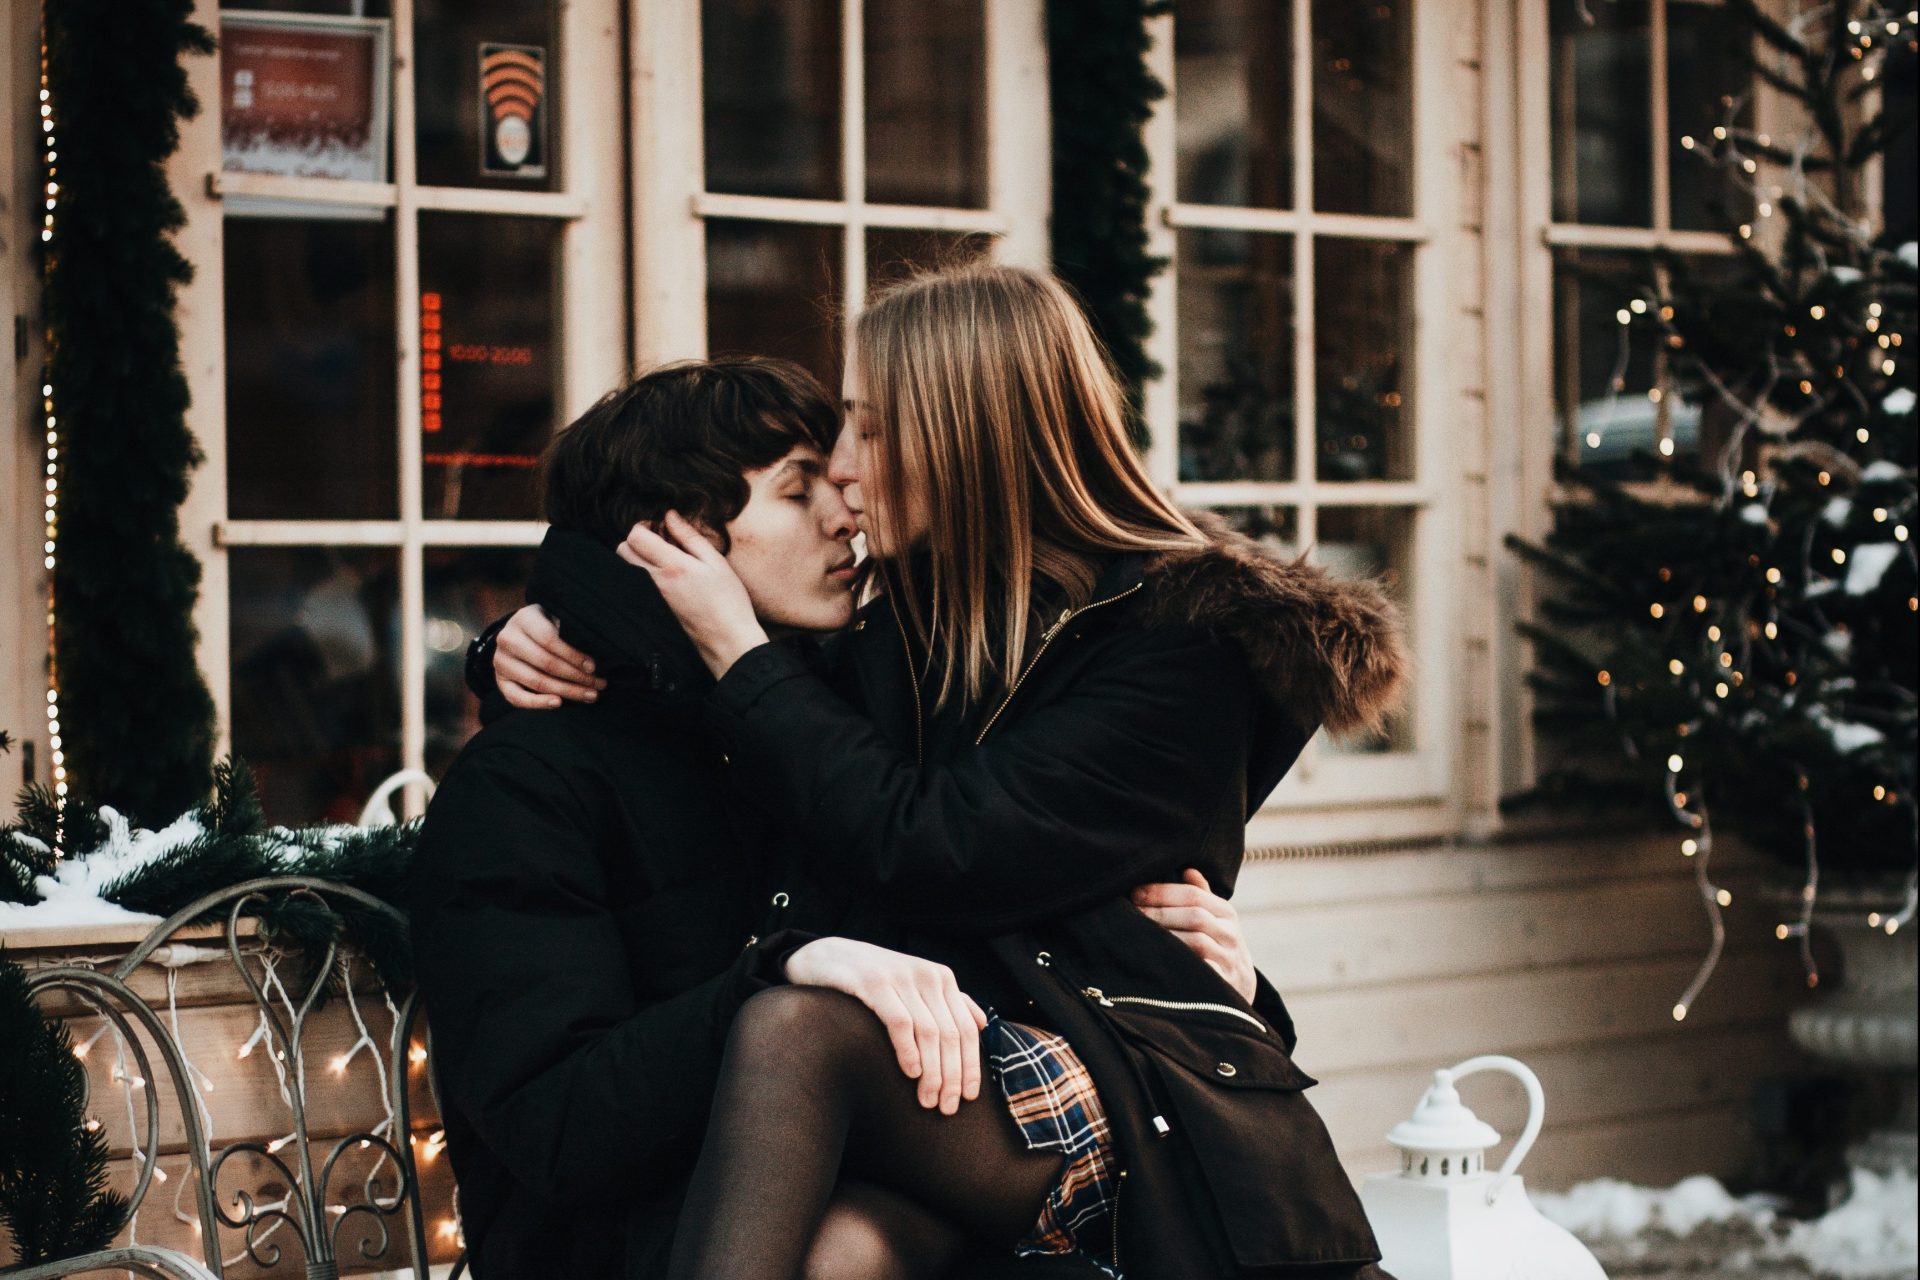 11 Things You Should Know About A Libra Before Dating One